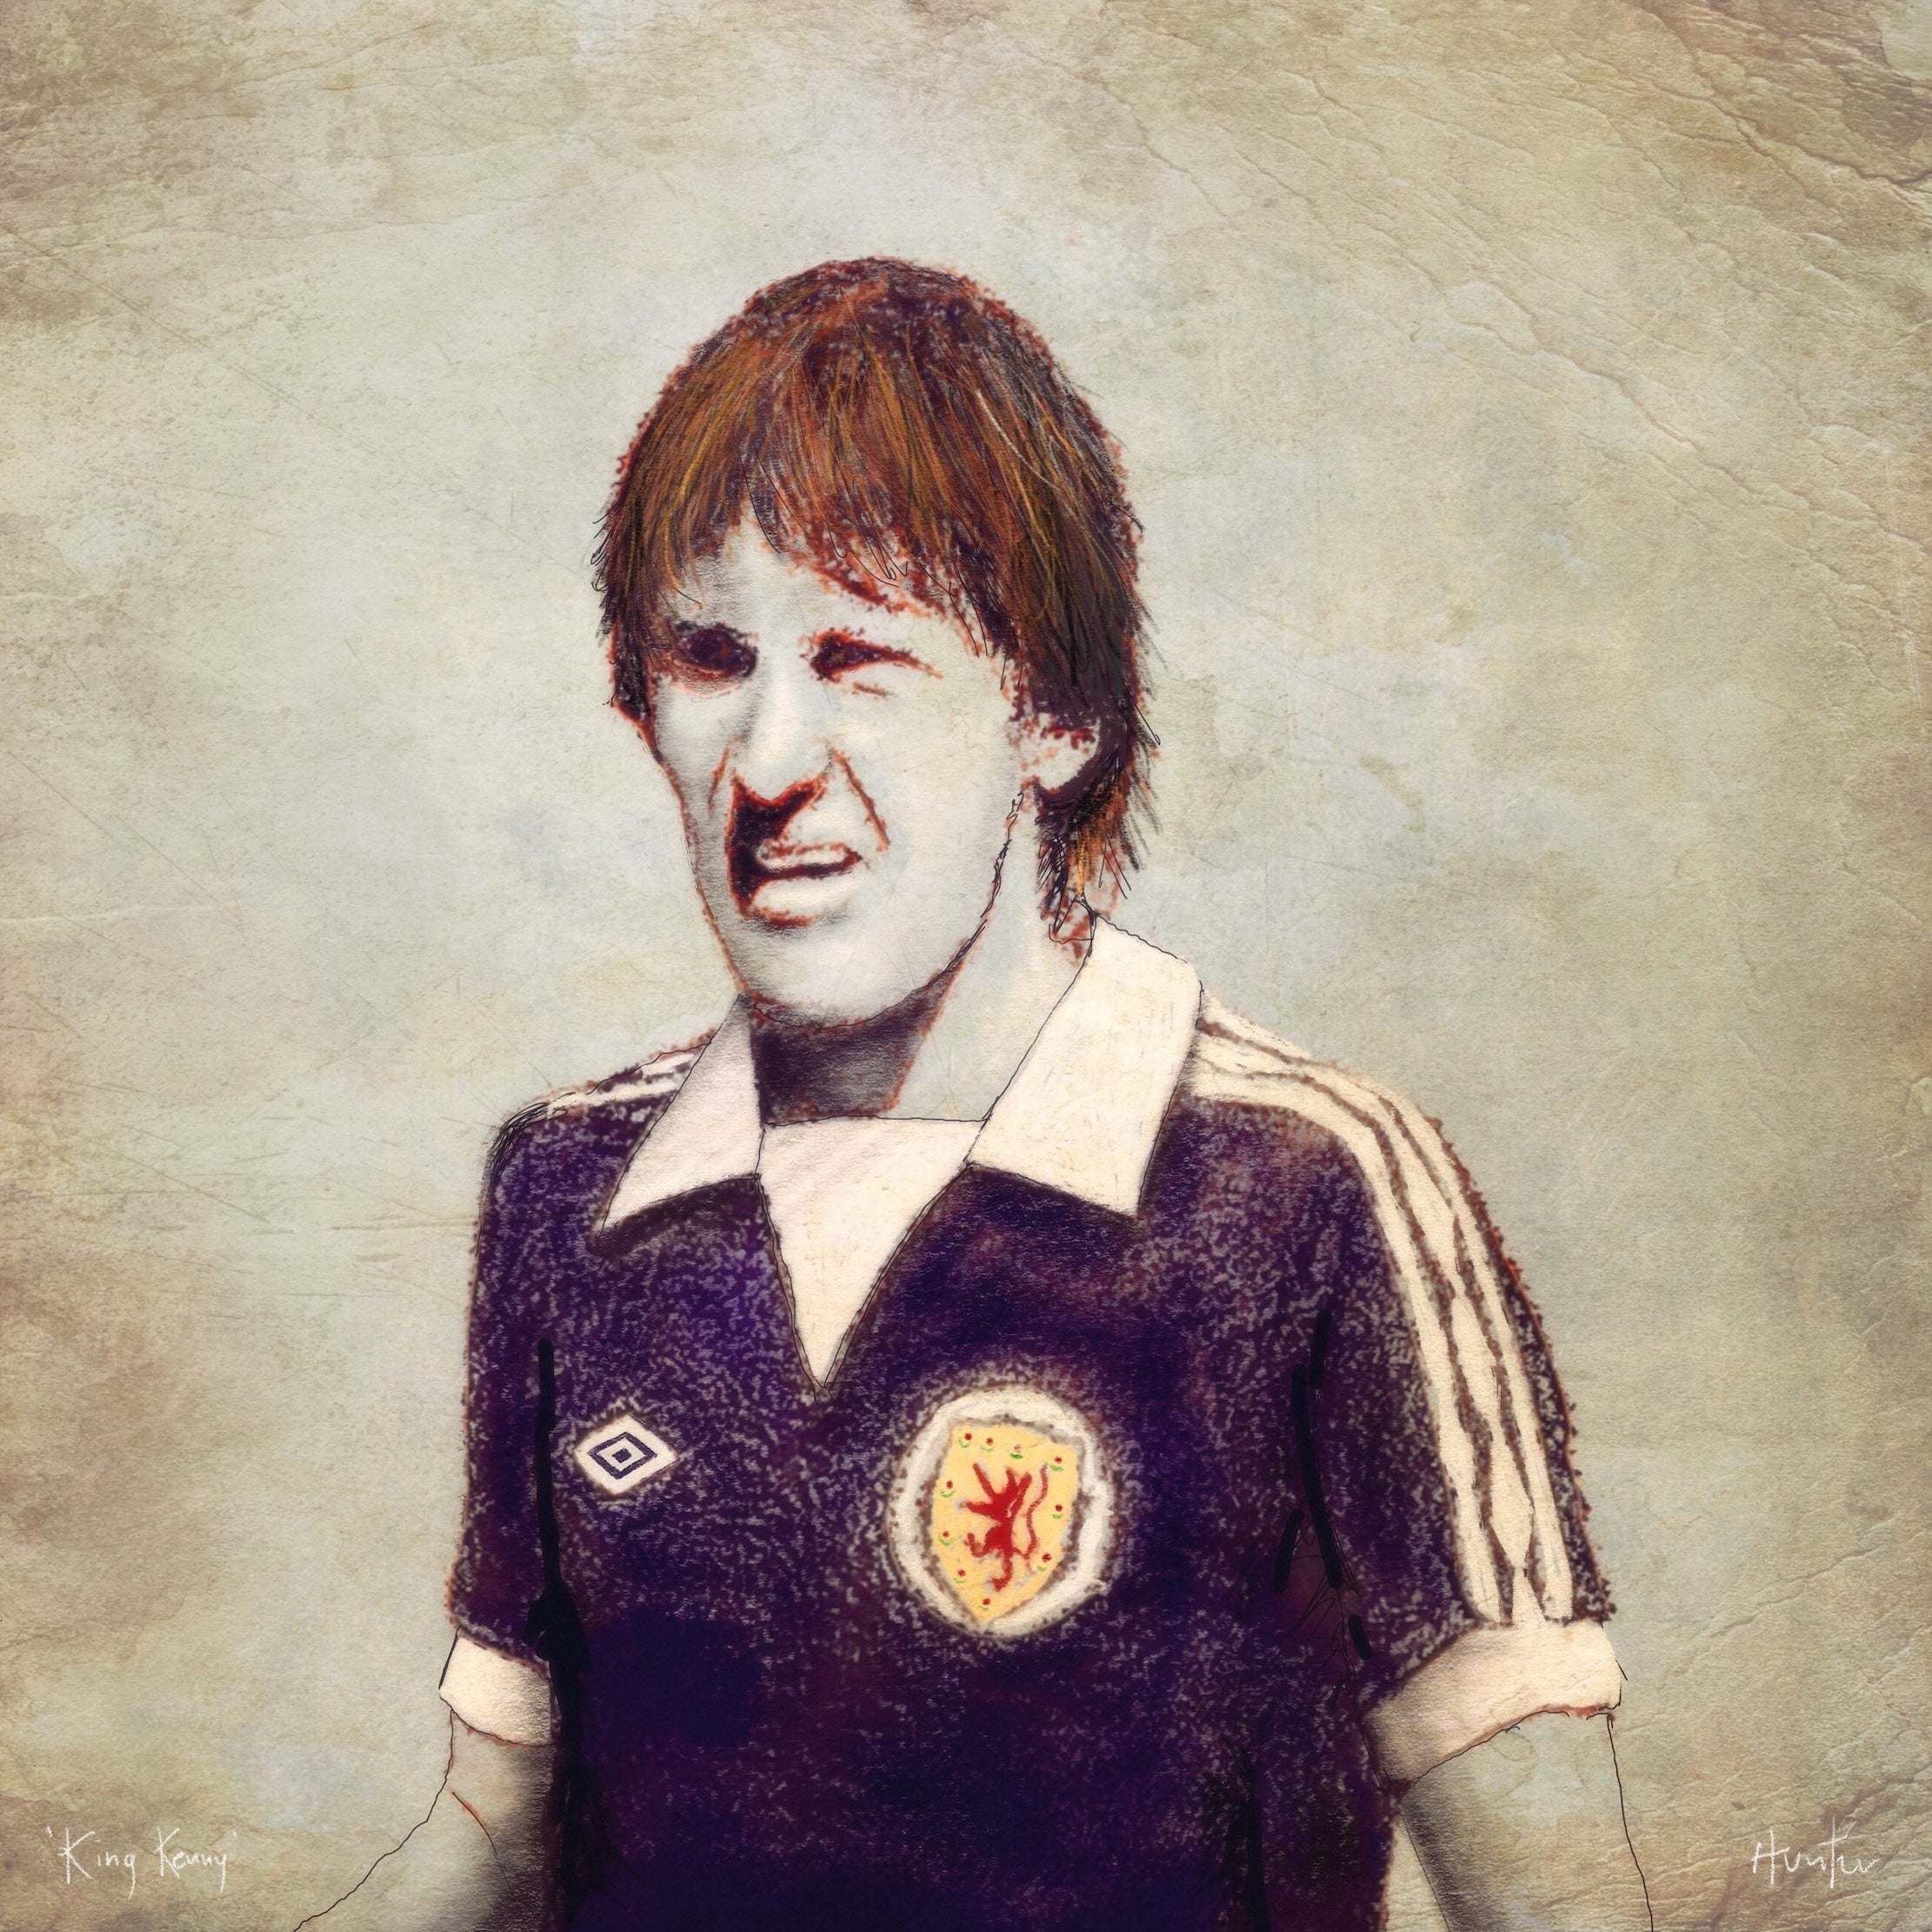 King Kenny Dalglish | Scotland In Your Pocket Art Print-Scotland In Your Pocket Framed Prints-Edinburgh & Glasgow Art Gallery-Paintings, Prints, Homeware, Art Gifts From Scotland By Scottish Artist Kevin Hunter